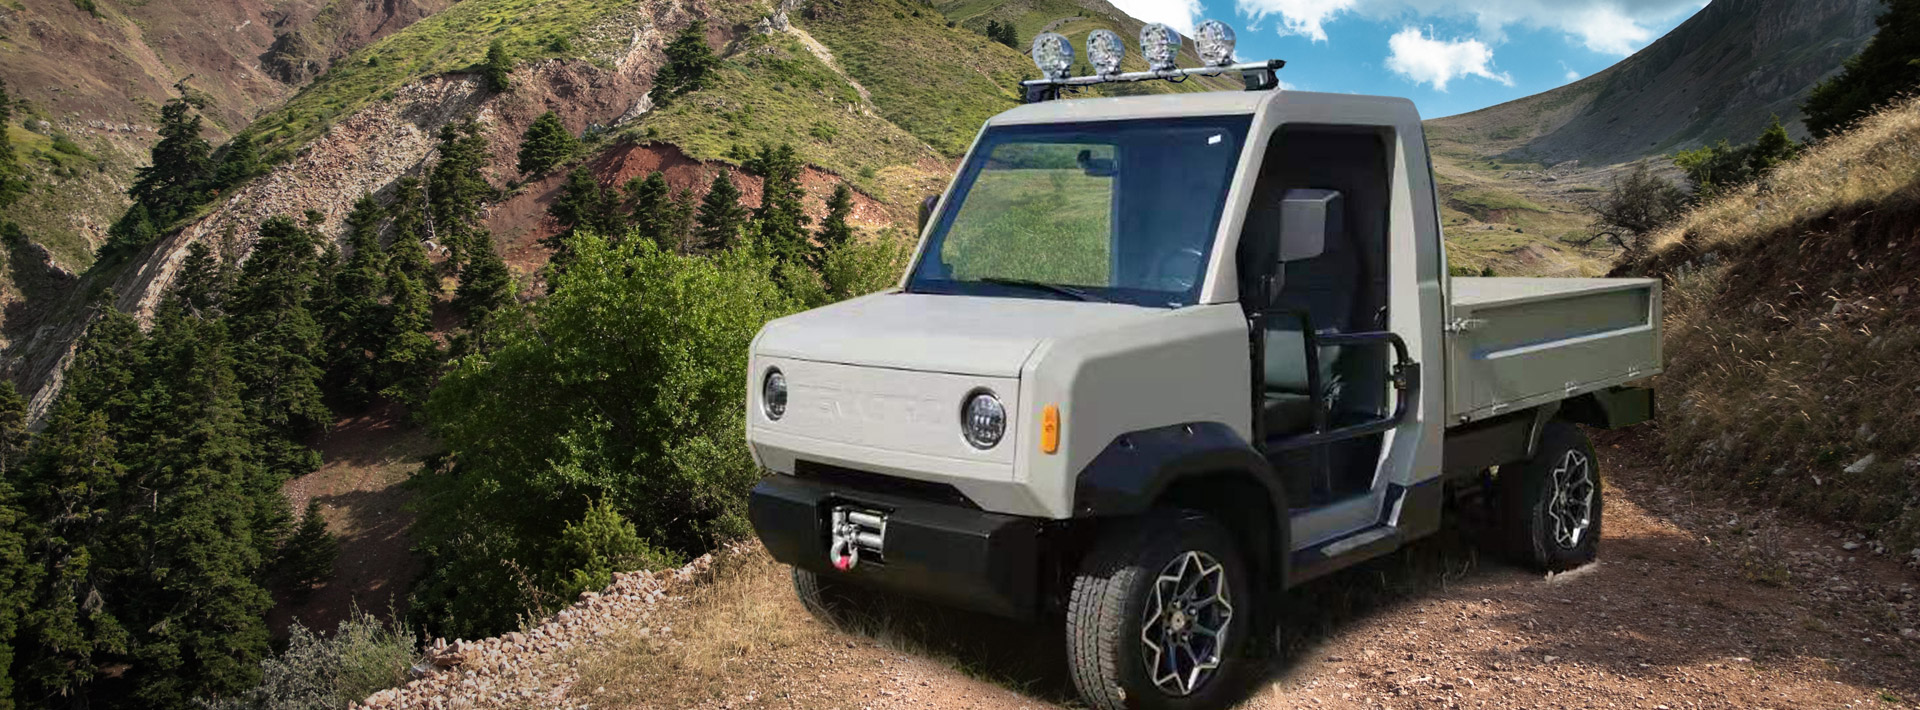 ORV electric off-road vehicle